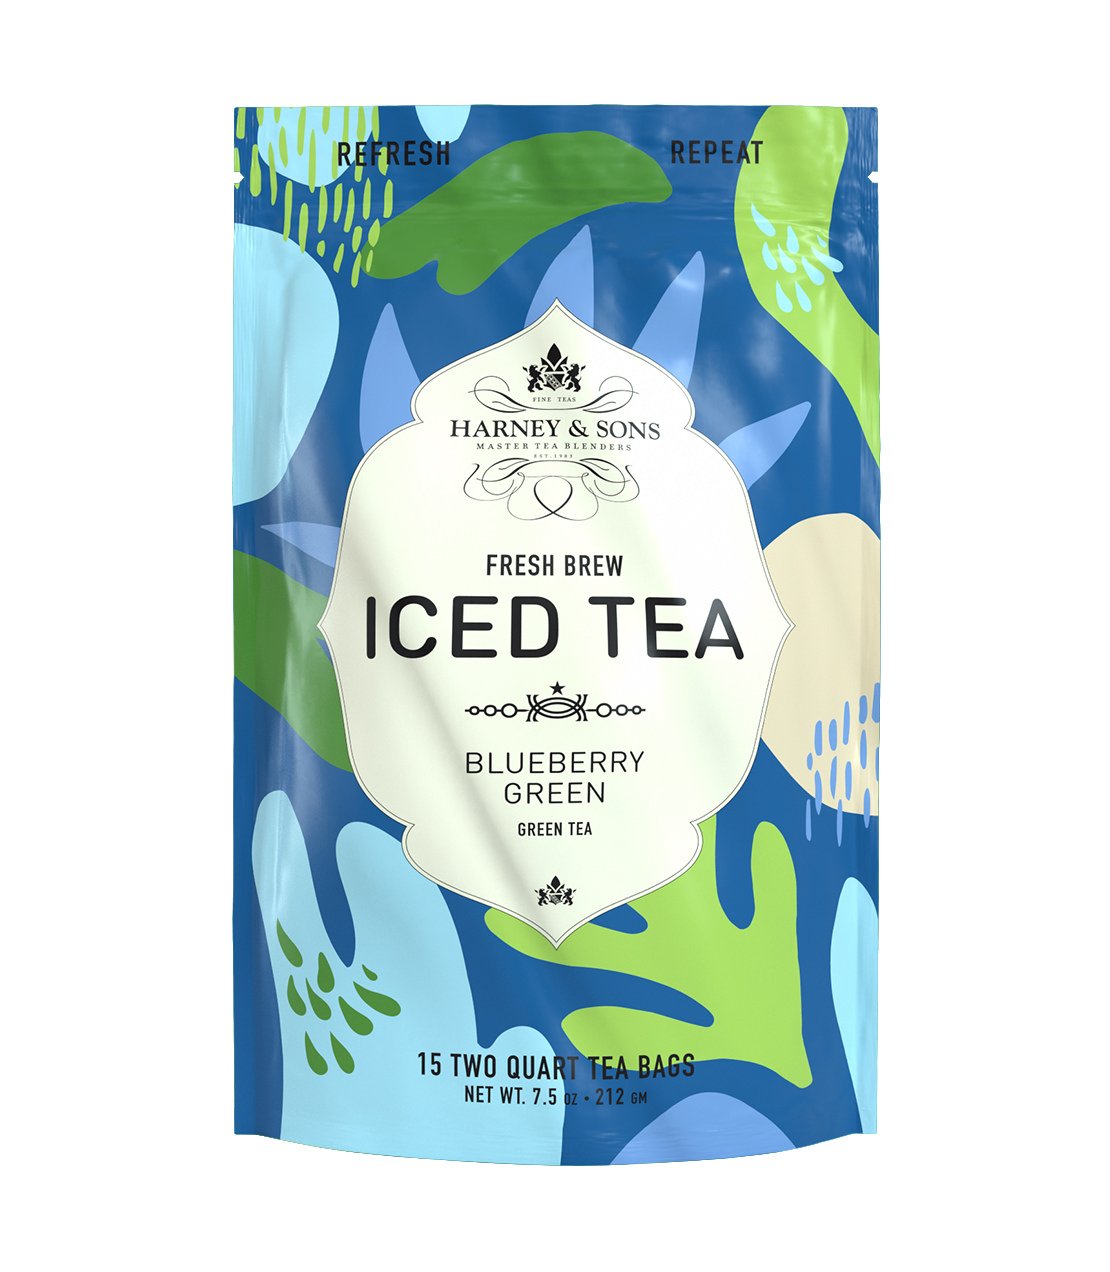 Blueberry Green - Bag of 15 Pouches for Fresh Brew Iced Tea - Harney & Sons Fine Teas Europe